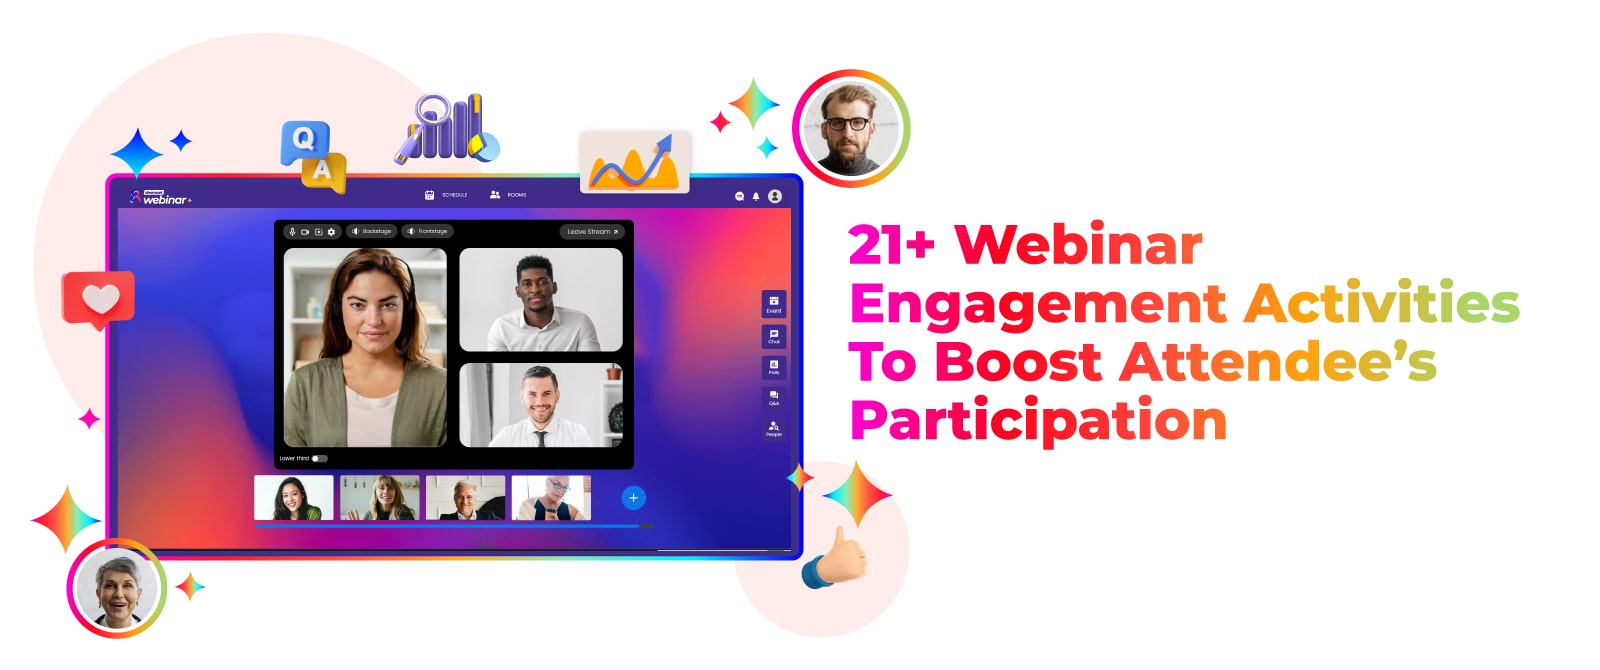 21+ Webinar Engagement Activities To Boost Attendee’s Participation